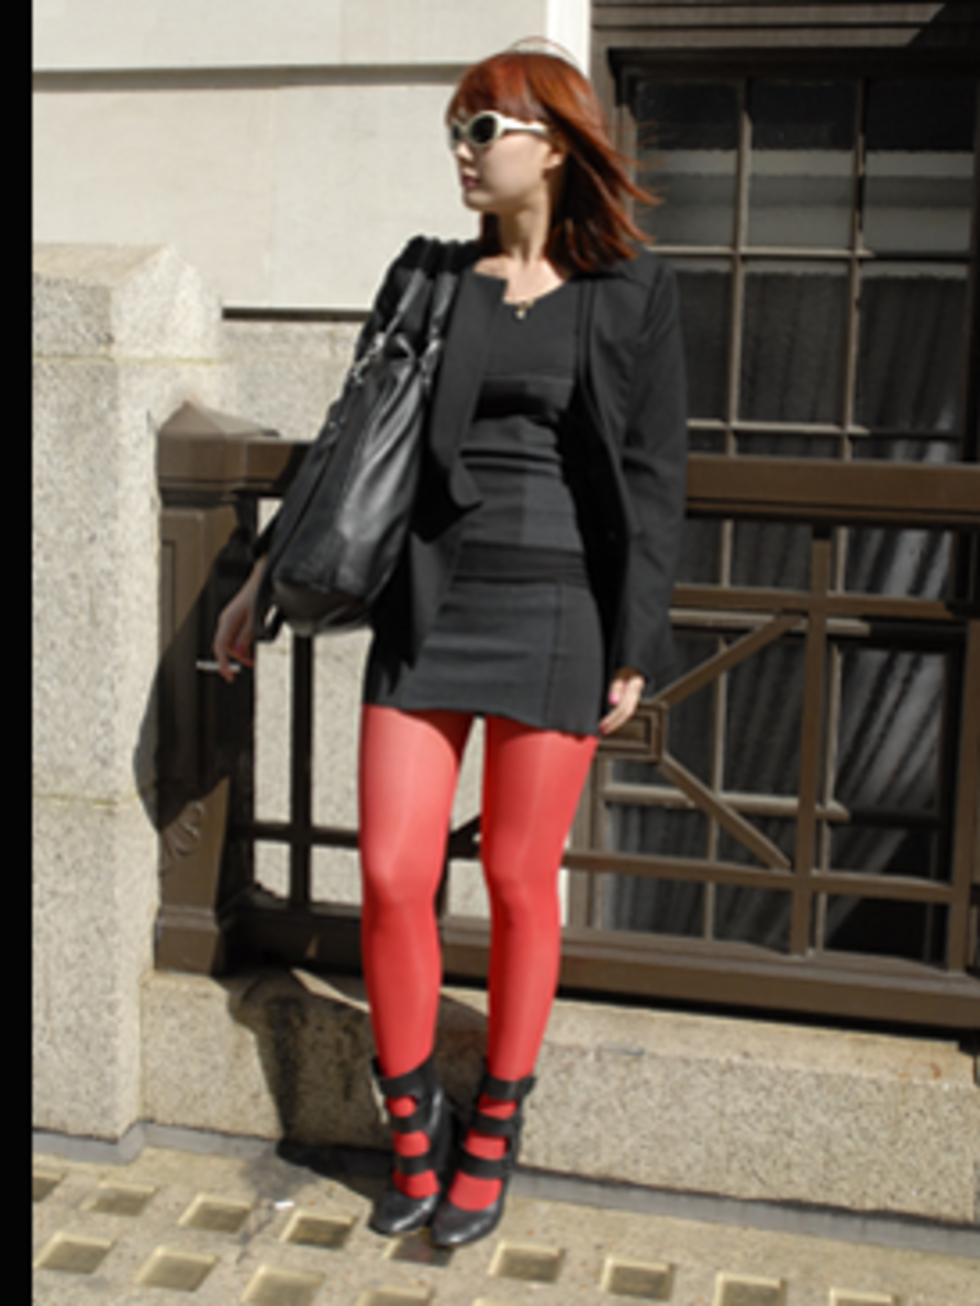 <p>A chic black outfit is given a kooky edge with bright red tights and matching hair. The Eley Kishimoto fetish-esque shoes add sex appeal.</p>